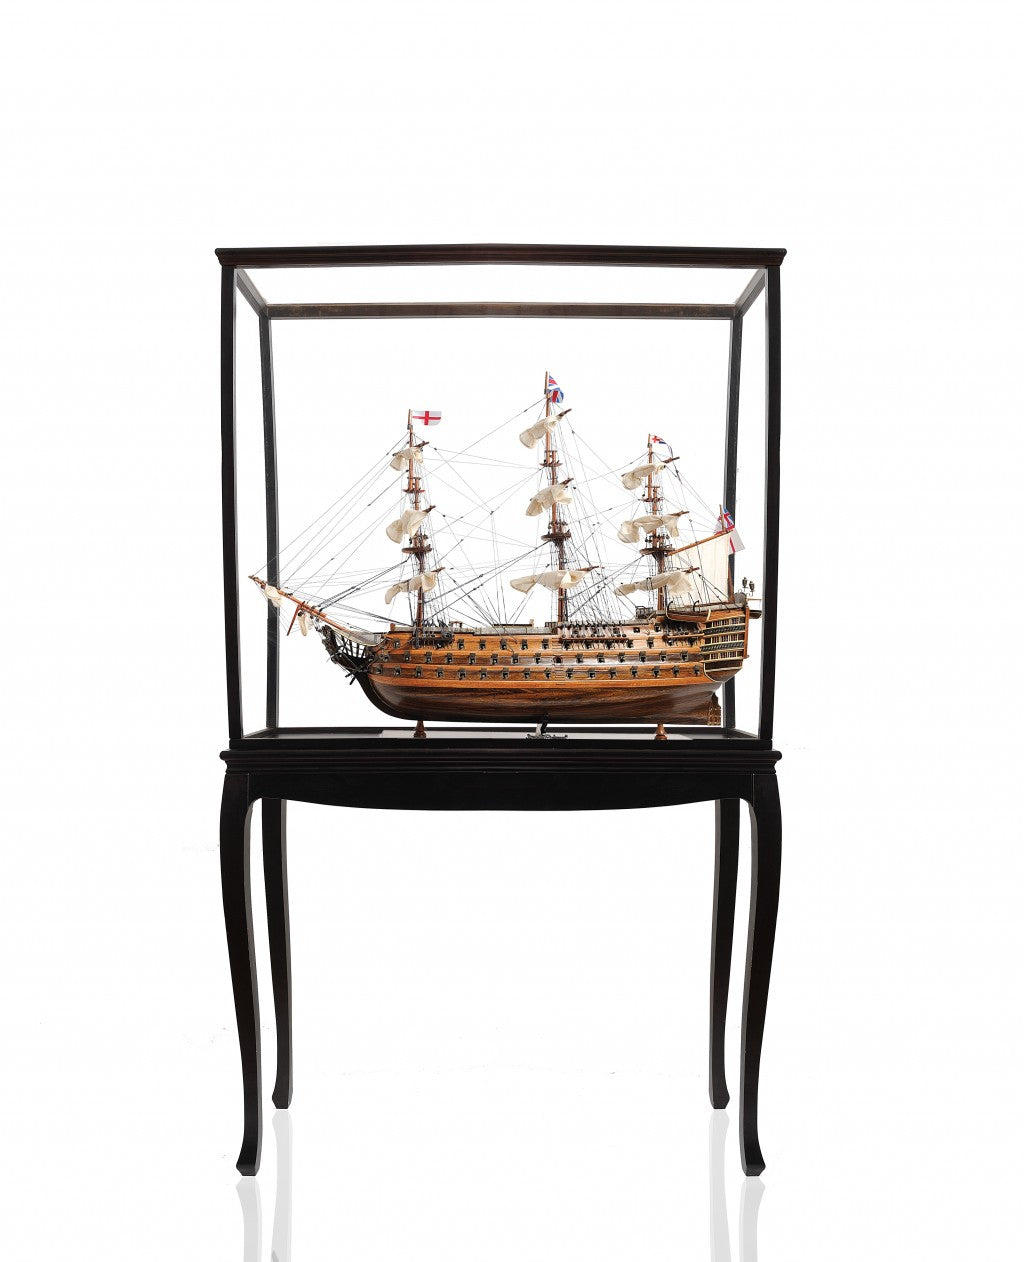 30" Wood Brown HMS Victory Medium Open Front Display Case Boat Hand Painted Decorative Boat